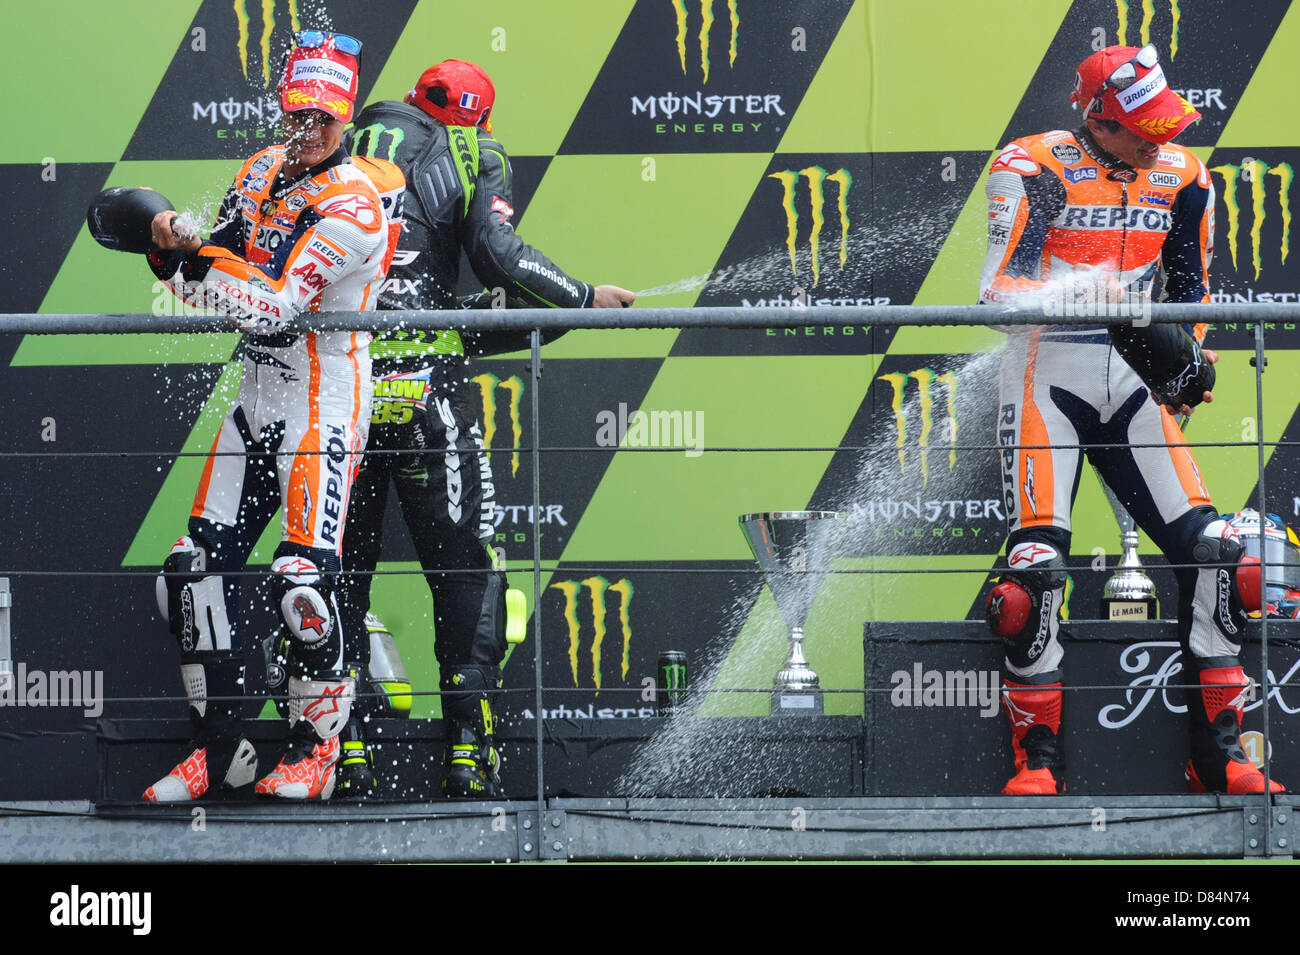 Le Mans, France. 19th May, 2013. The winners of the Moto GP World Championship from the Le Mans racing circuit. Stock Photo